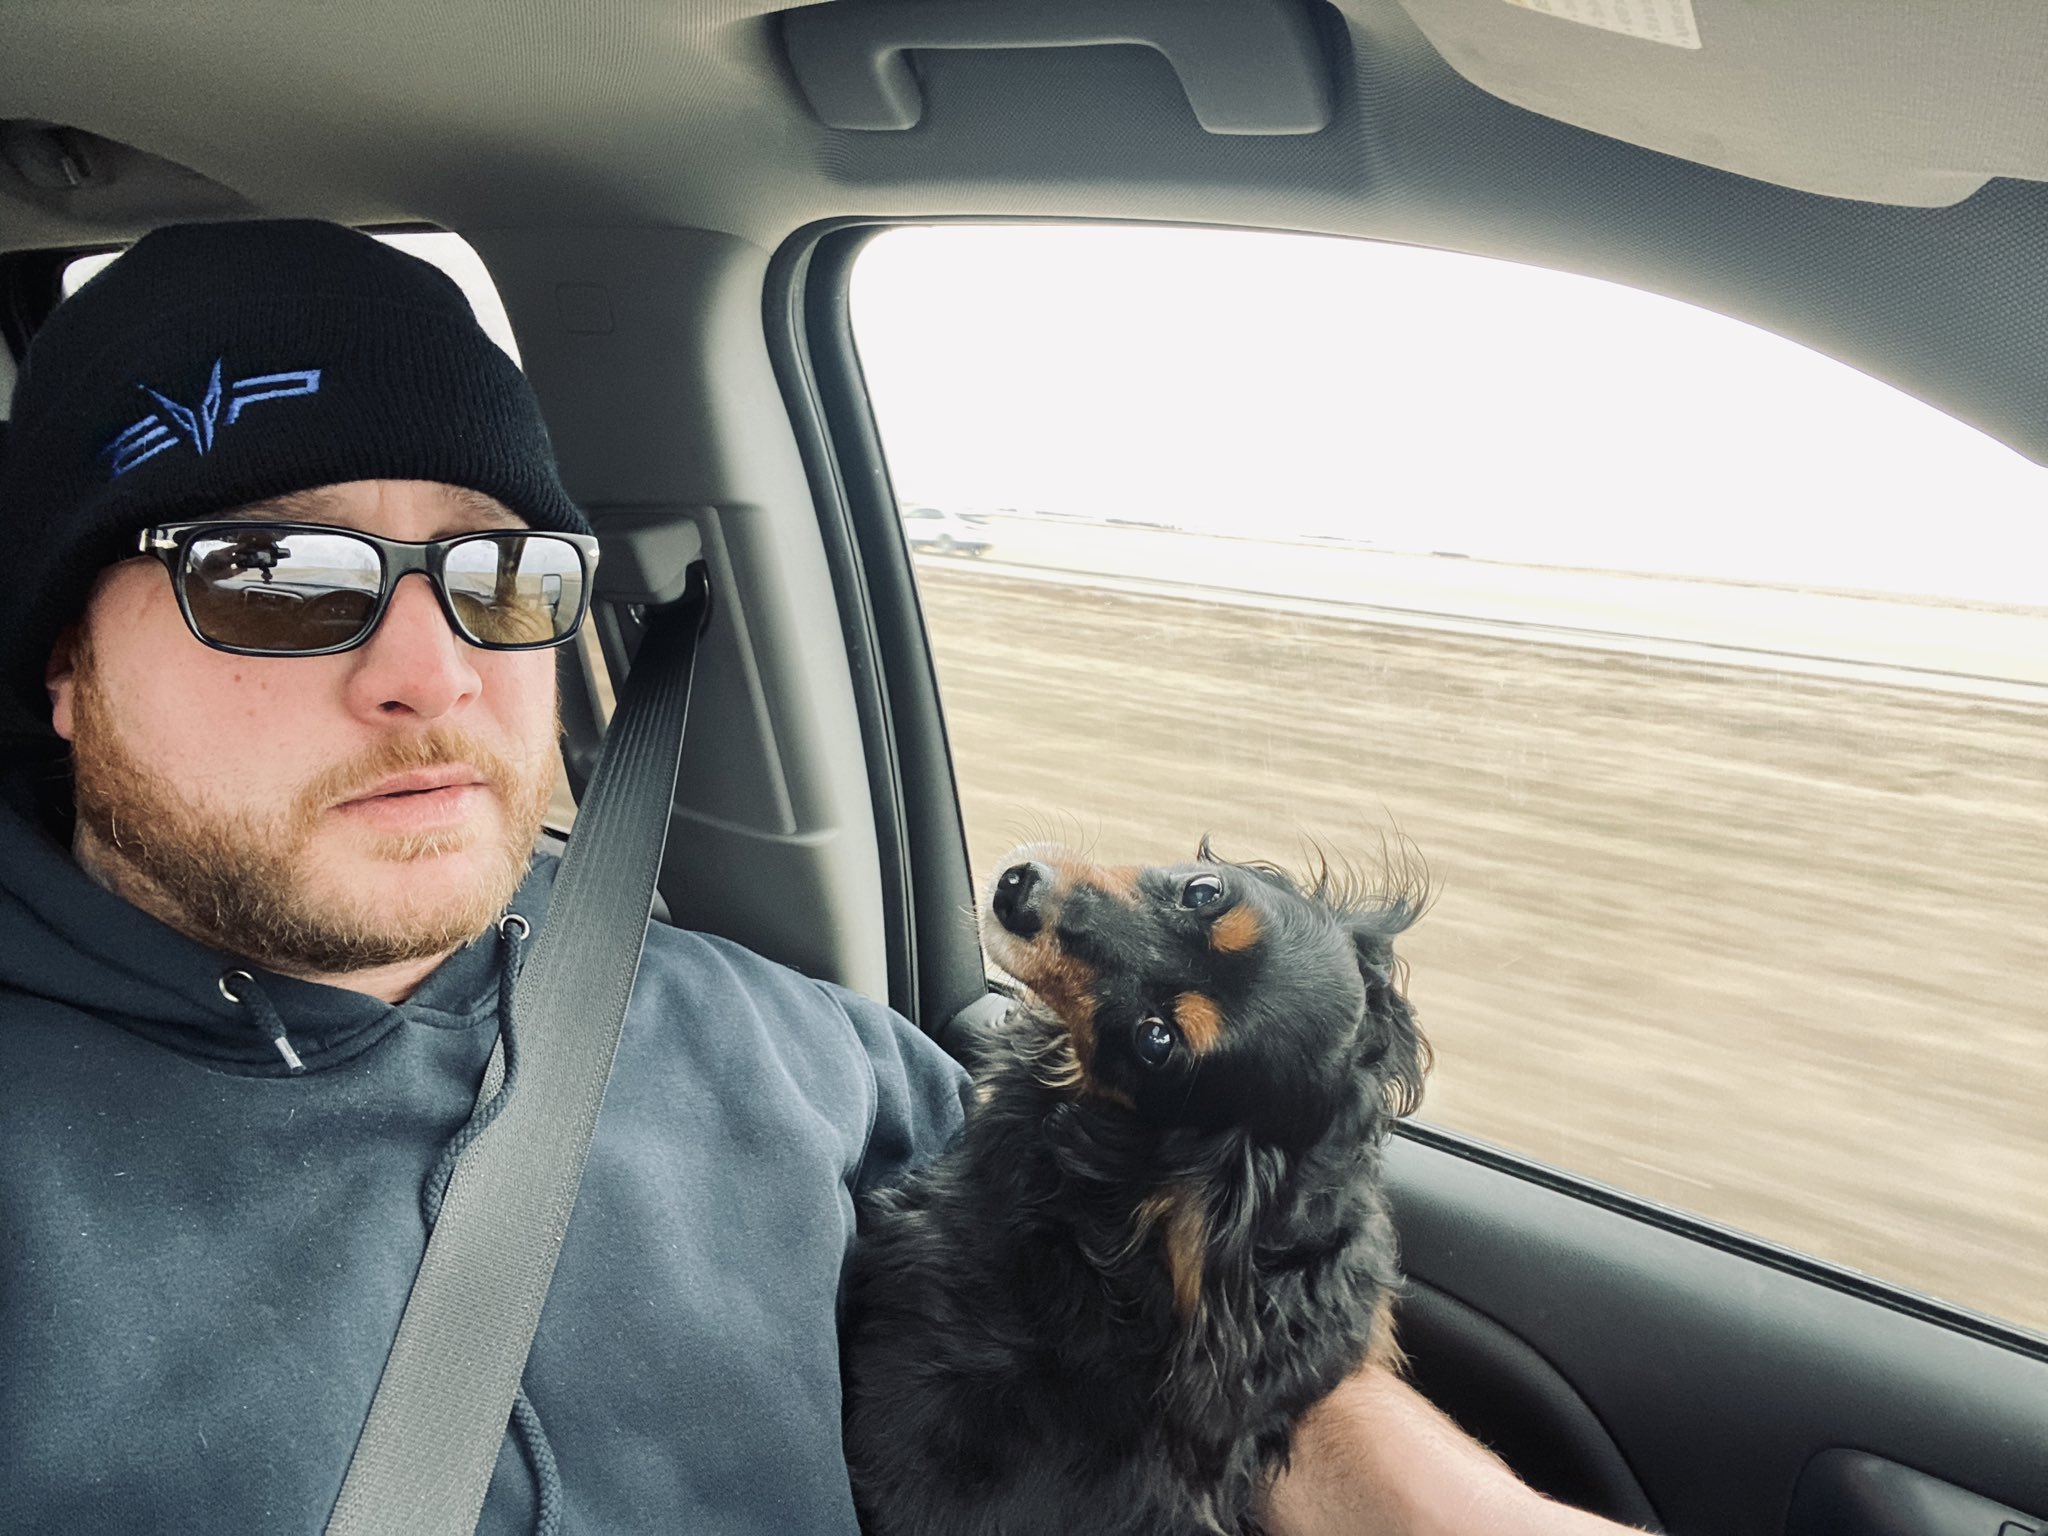 Rick Ness returning home with his dog after completing his work on 'Gold Rush'